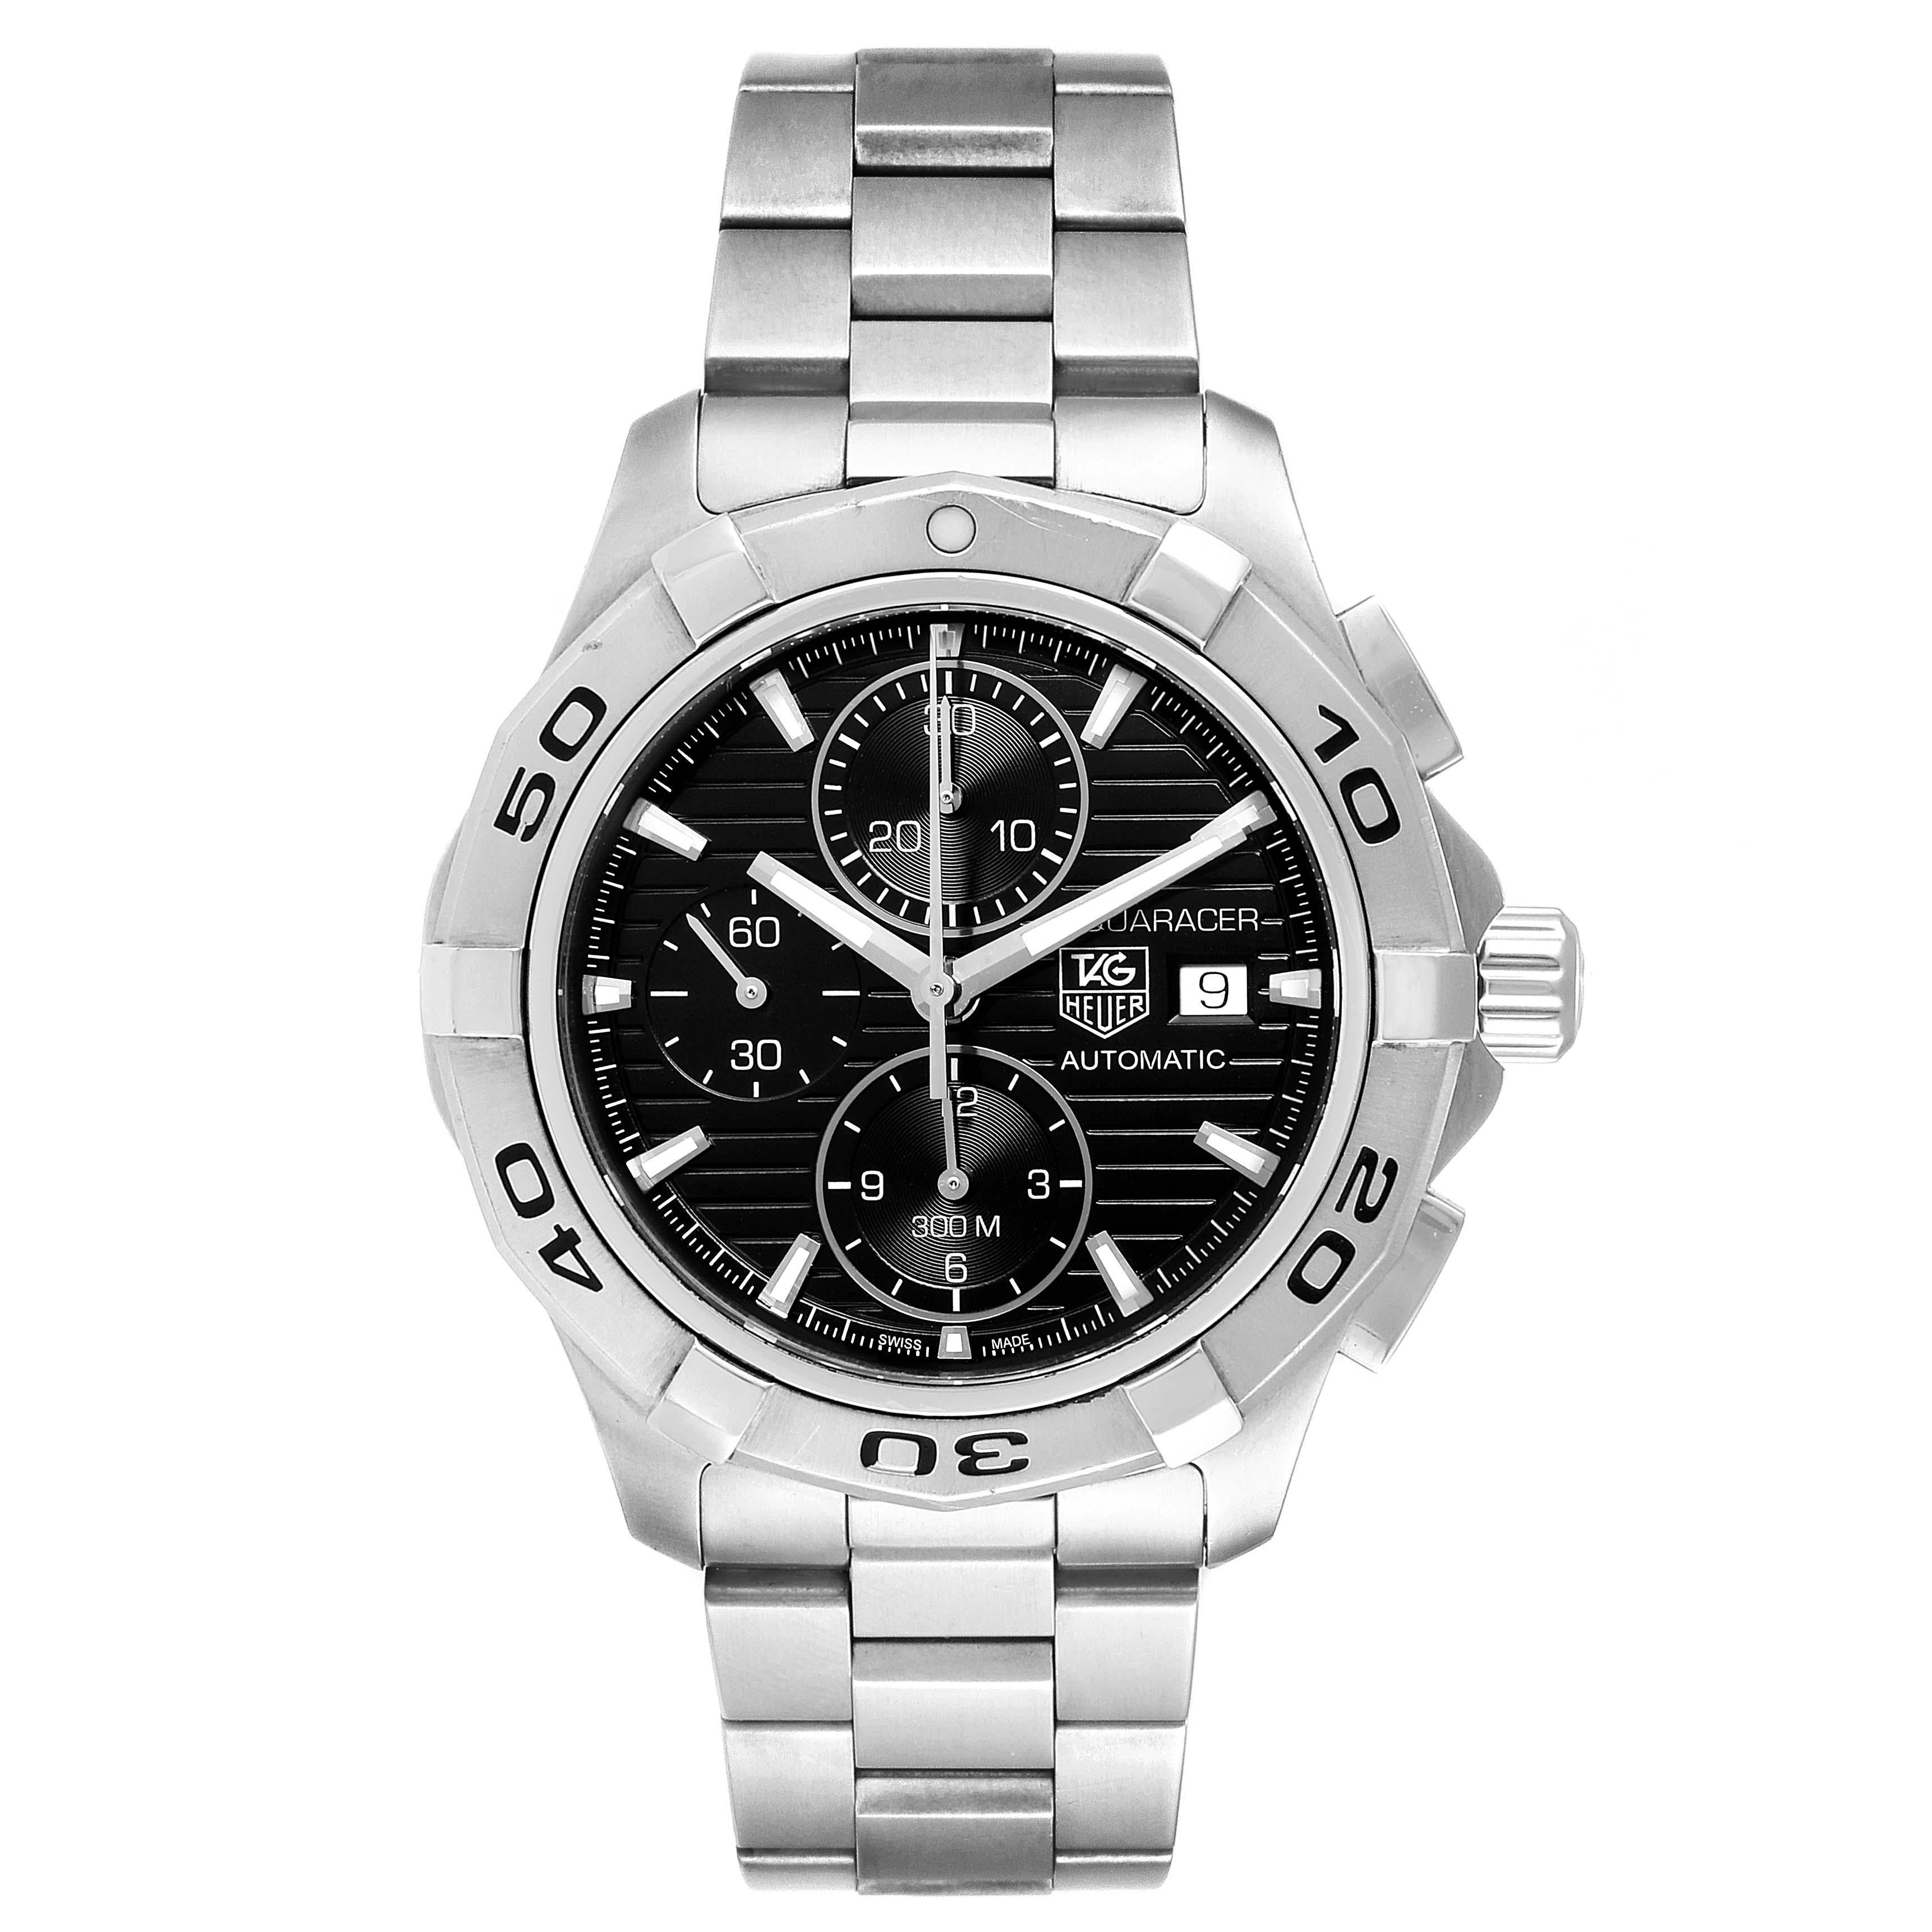 Tag Heuer Aquaracer Black Dial Steel Mens Watch CAP2110 Box Card. Automatic self-winding chronograph movement. Stainless steel case 44.0 mm in diameter. Case Thickness: 16.25mm. Oversize screw-in crown with double gaskets. Stainless Steel